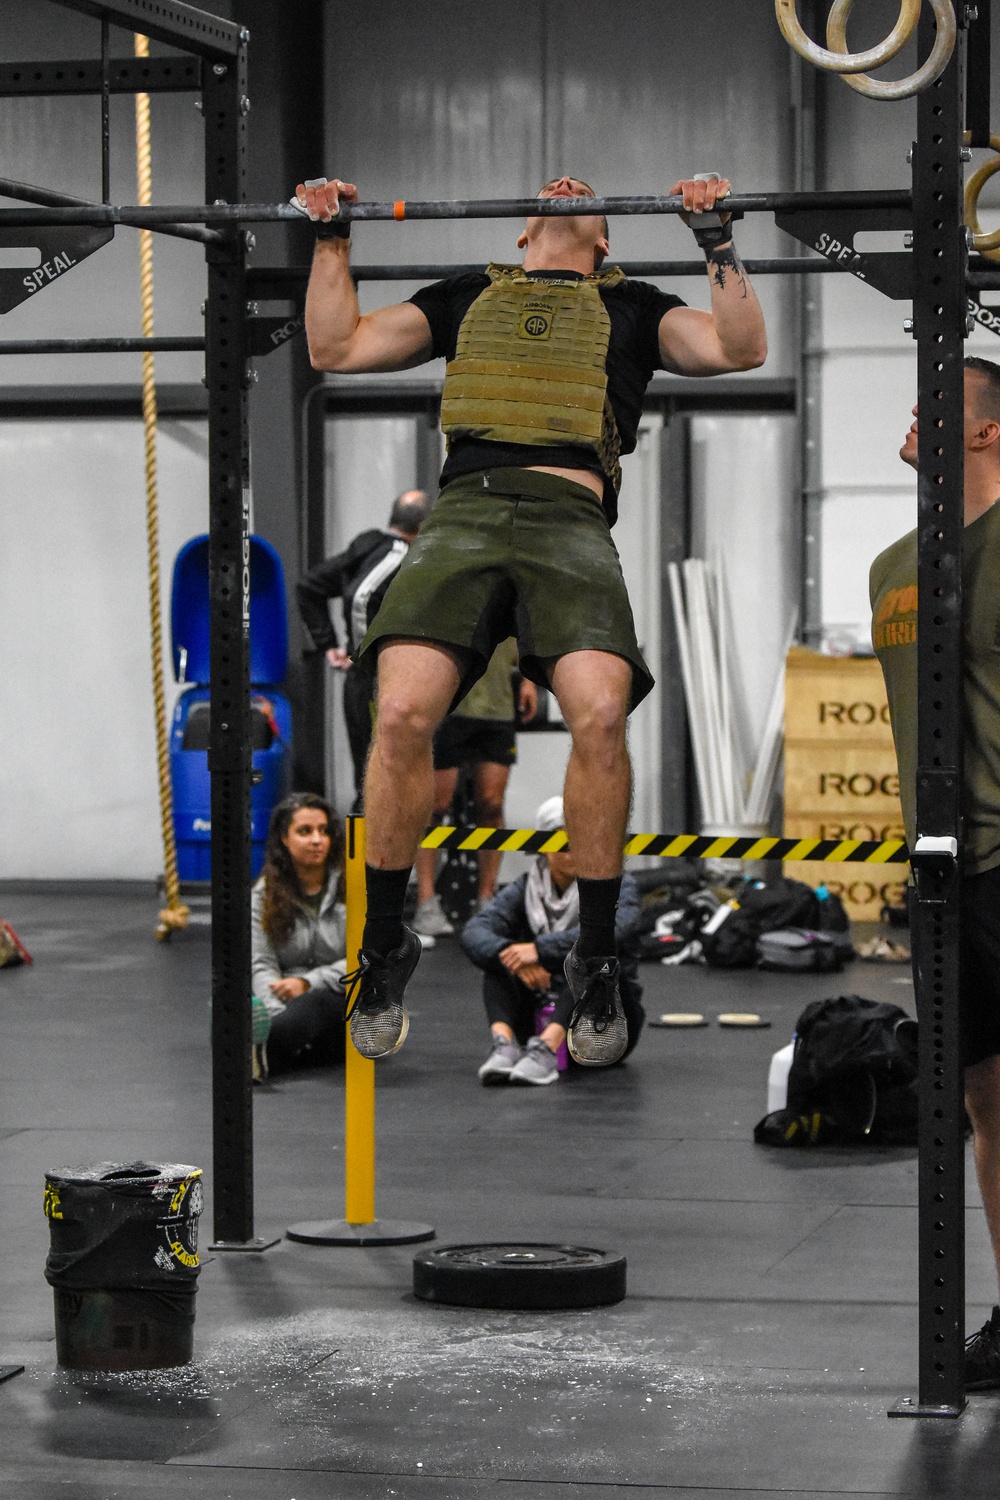 DVIDS - Images - U.S. Army Fitness Team Tryouts [Image 16 of 55]